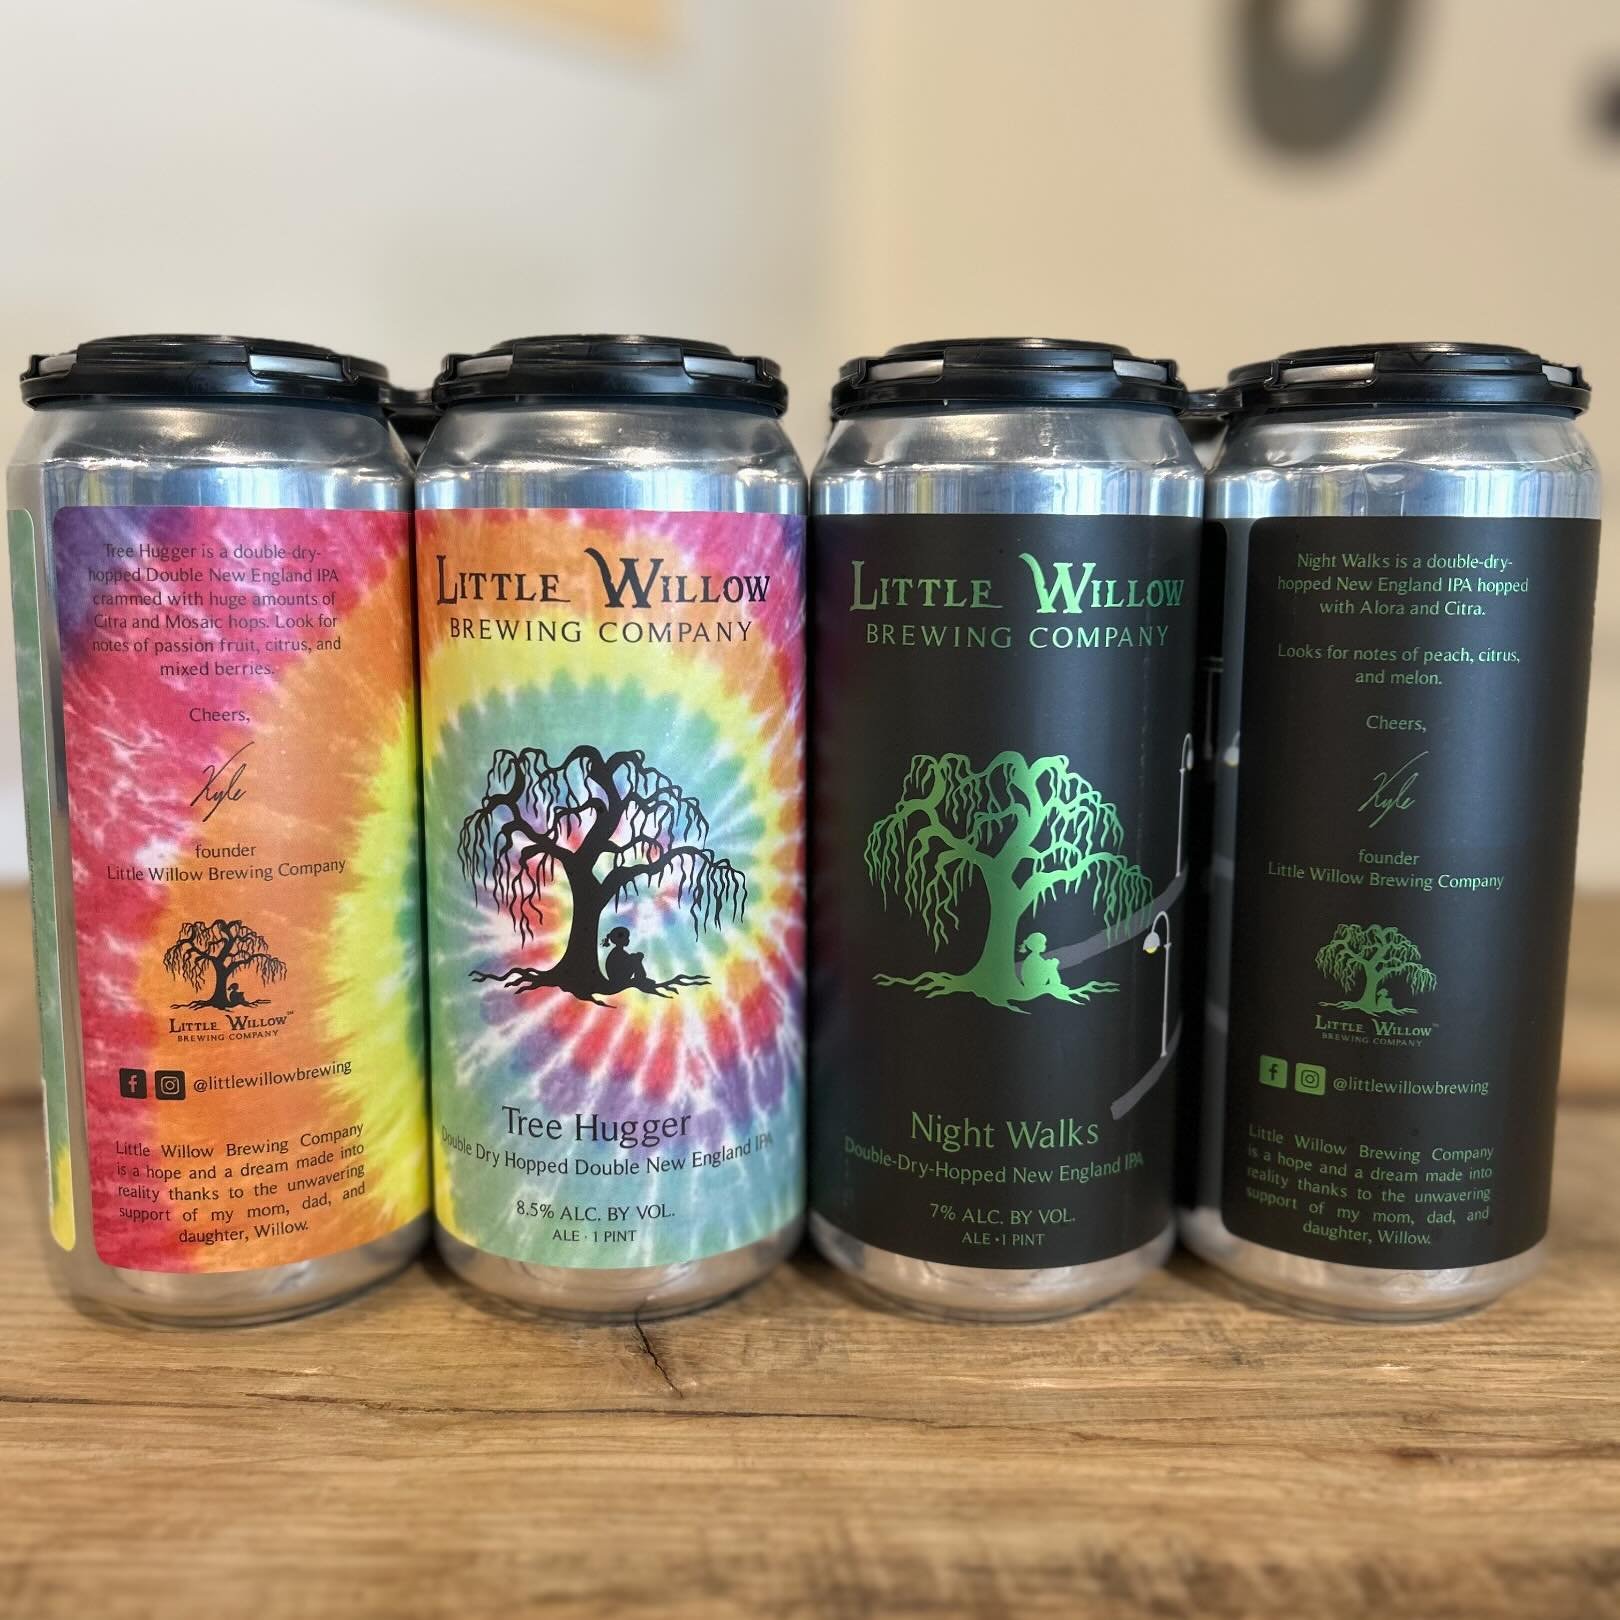 @littlewillowbrewing is back in the shop this week #NowAvailable #SudburyCraftBeer #DrinkLocal
&mdash;
🌳 Tree Hugger 🌳

8.5%, Double Dry Hopped Double New England IPA hopped with Citra and Mosaic.

Mixed berries, citrus, and grapefruit all the way 